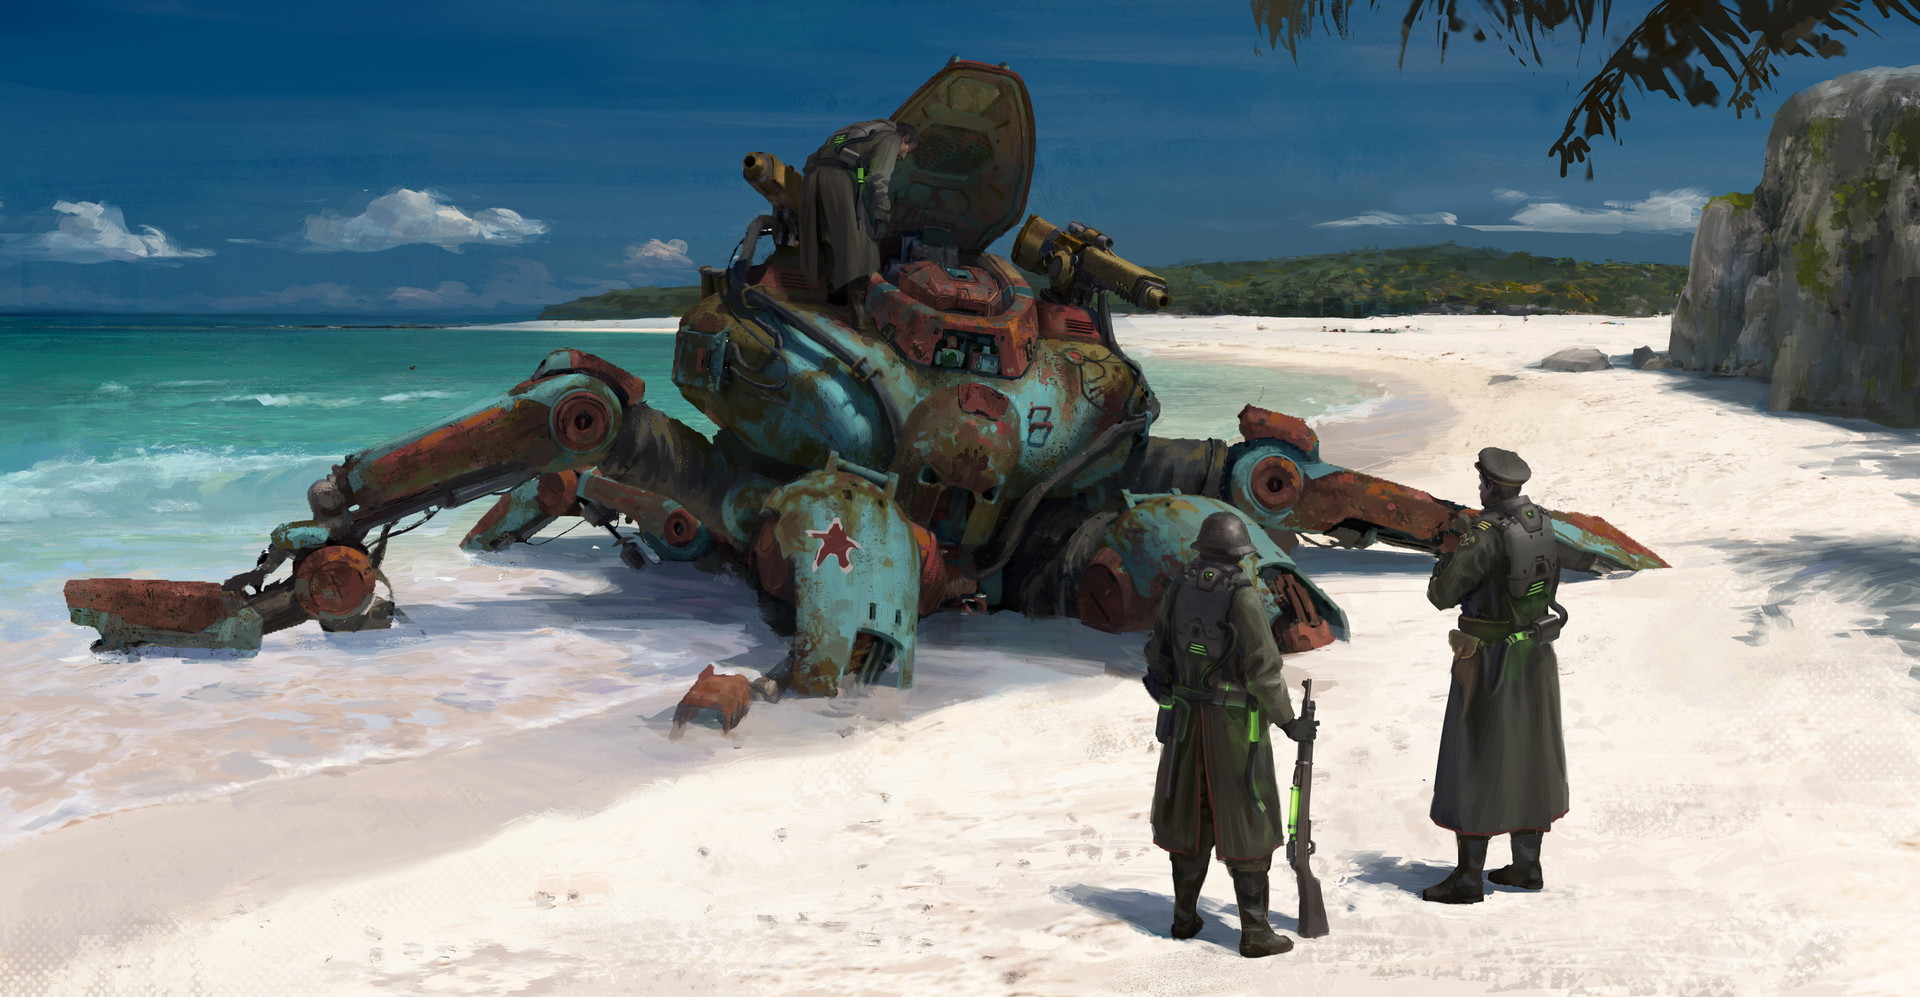 Futuristic Wreck Weapon Beach Tropical Water Fantasy Art Trench Coat USSR 1920x997